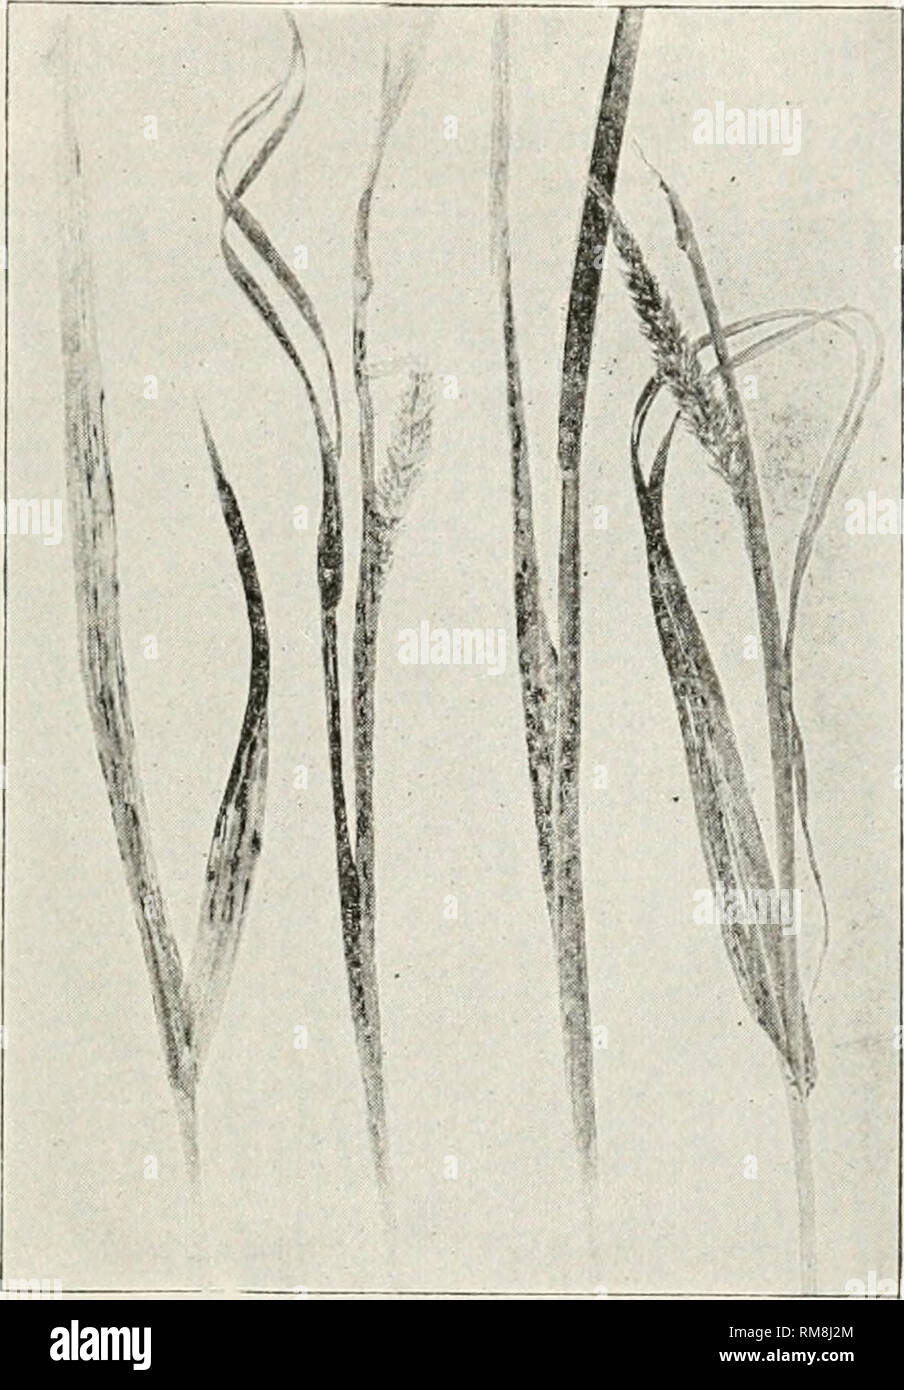 . Annual report of the Commissioner of Agriculture ... Agriculture -- New York (State). Diseases of Timothy 579 a community cooperative proposition than one for thie individual grower. The methods to be employed are those used in the treat- ment of wheat for loose smut.. Fig. 021. Old Timothy Plants Hav- ing Badly Diseased Leaf Blades AND Sheaths. In a Few Cases it Will be Noted That the Blades Are Beginning to Split. RUST The rust fungus, Puccinia PJilei-pratensis Eriks. &amp; Henn., occurs on the leaves, stems, and heads of timothy, meadow fescue, orchard grass, and few other grasses. The pu Stock Photo